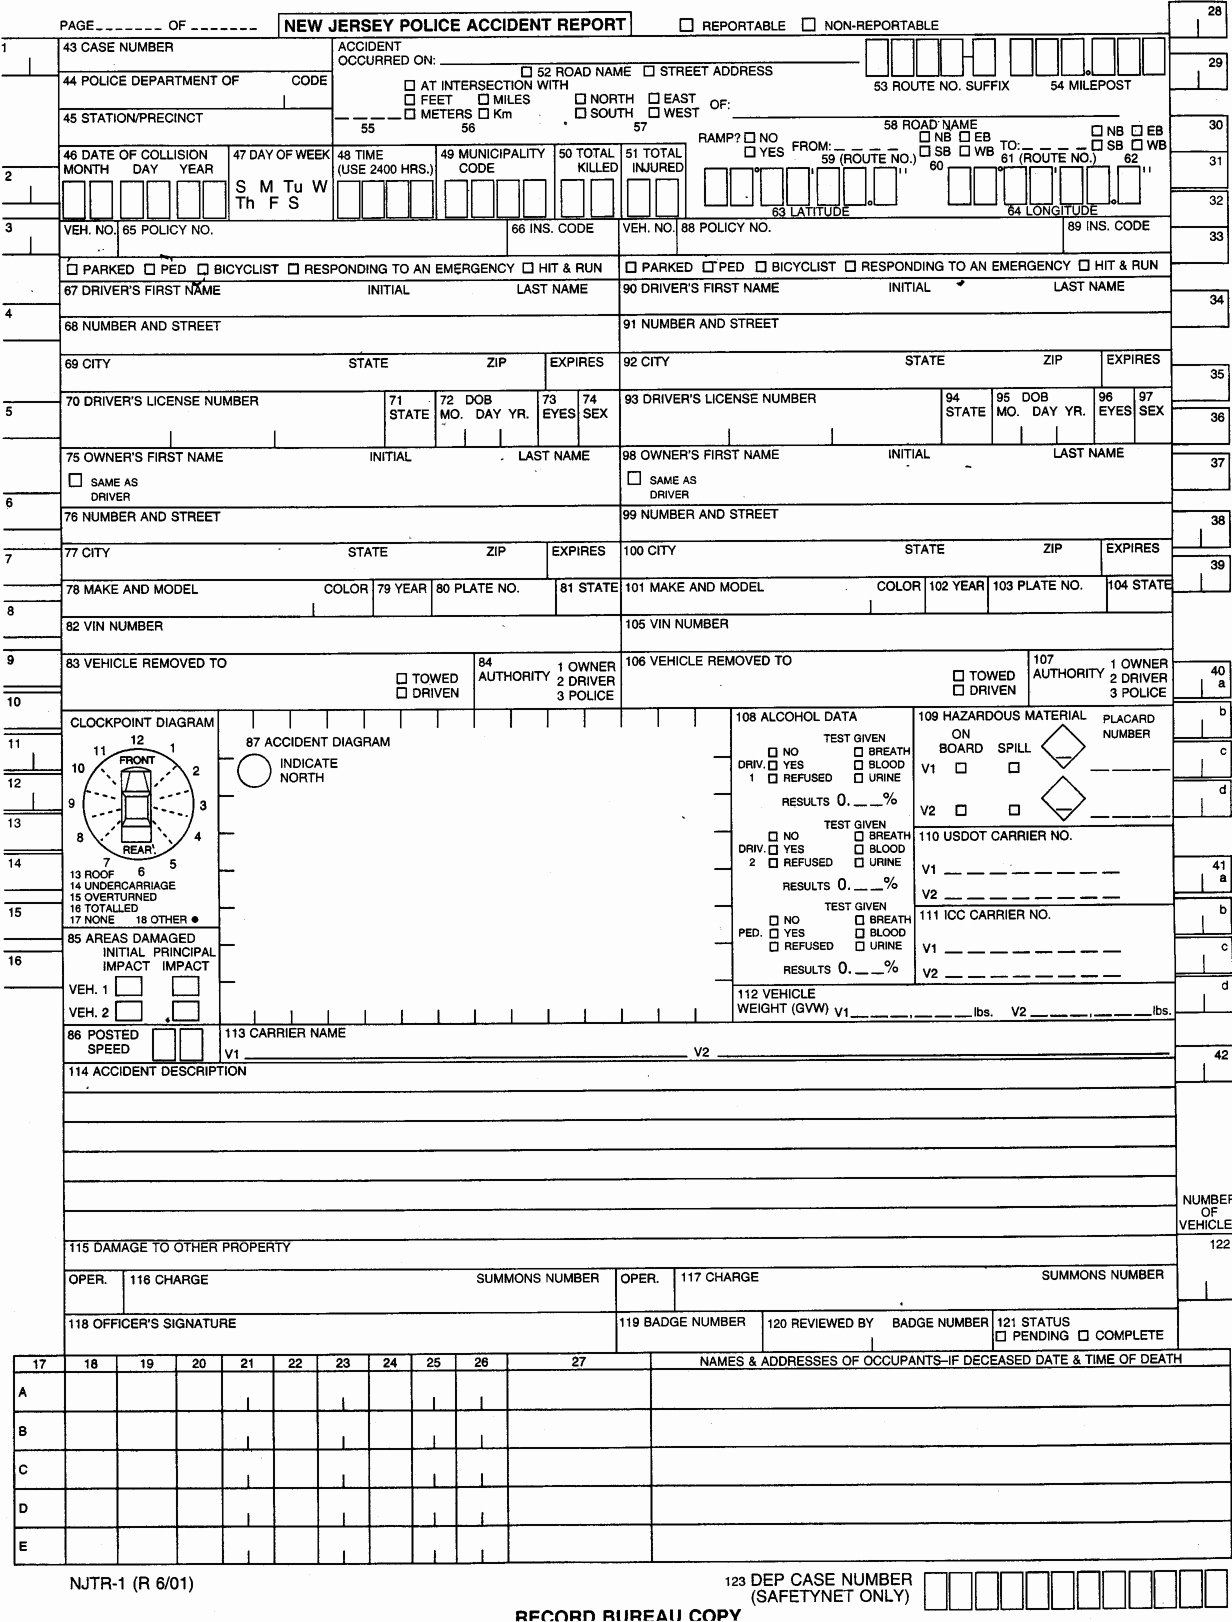 Police Accident Report form